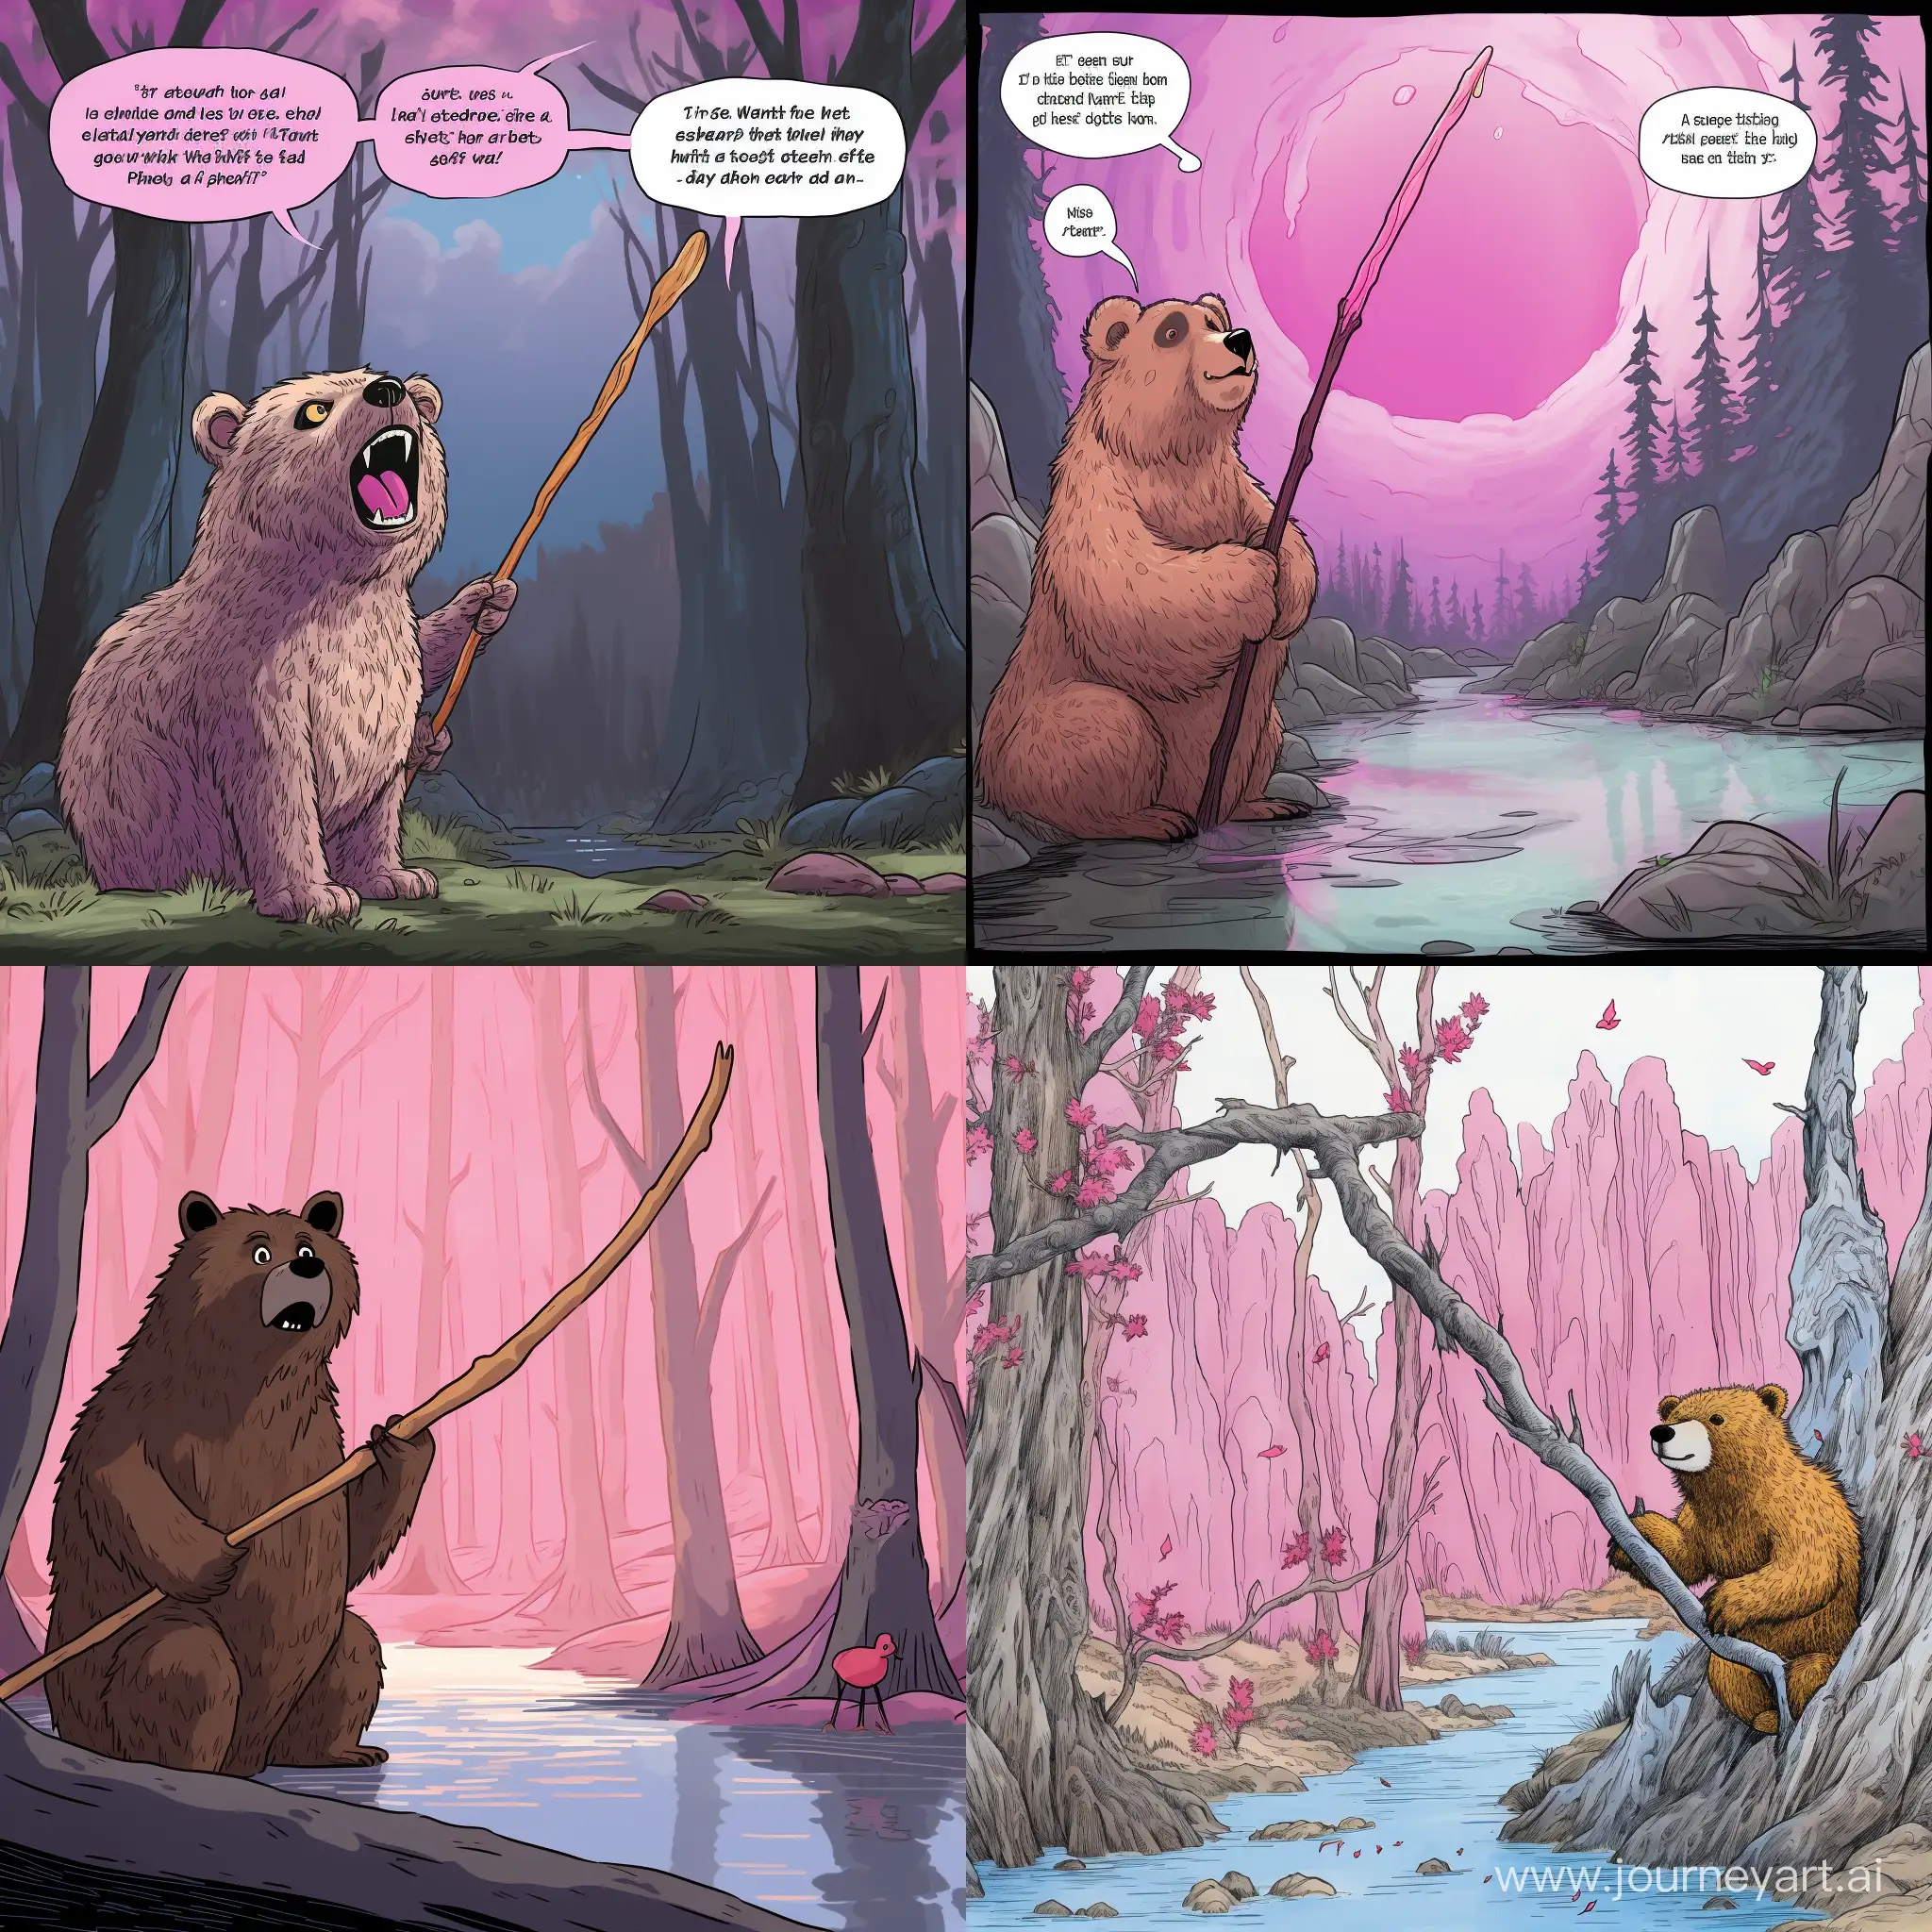 A color comedy page the bear holding pink stick